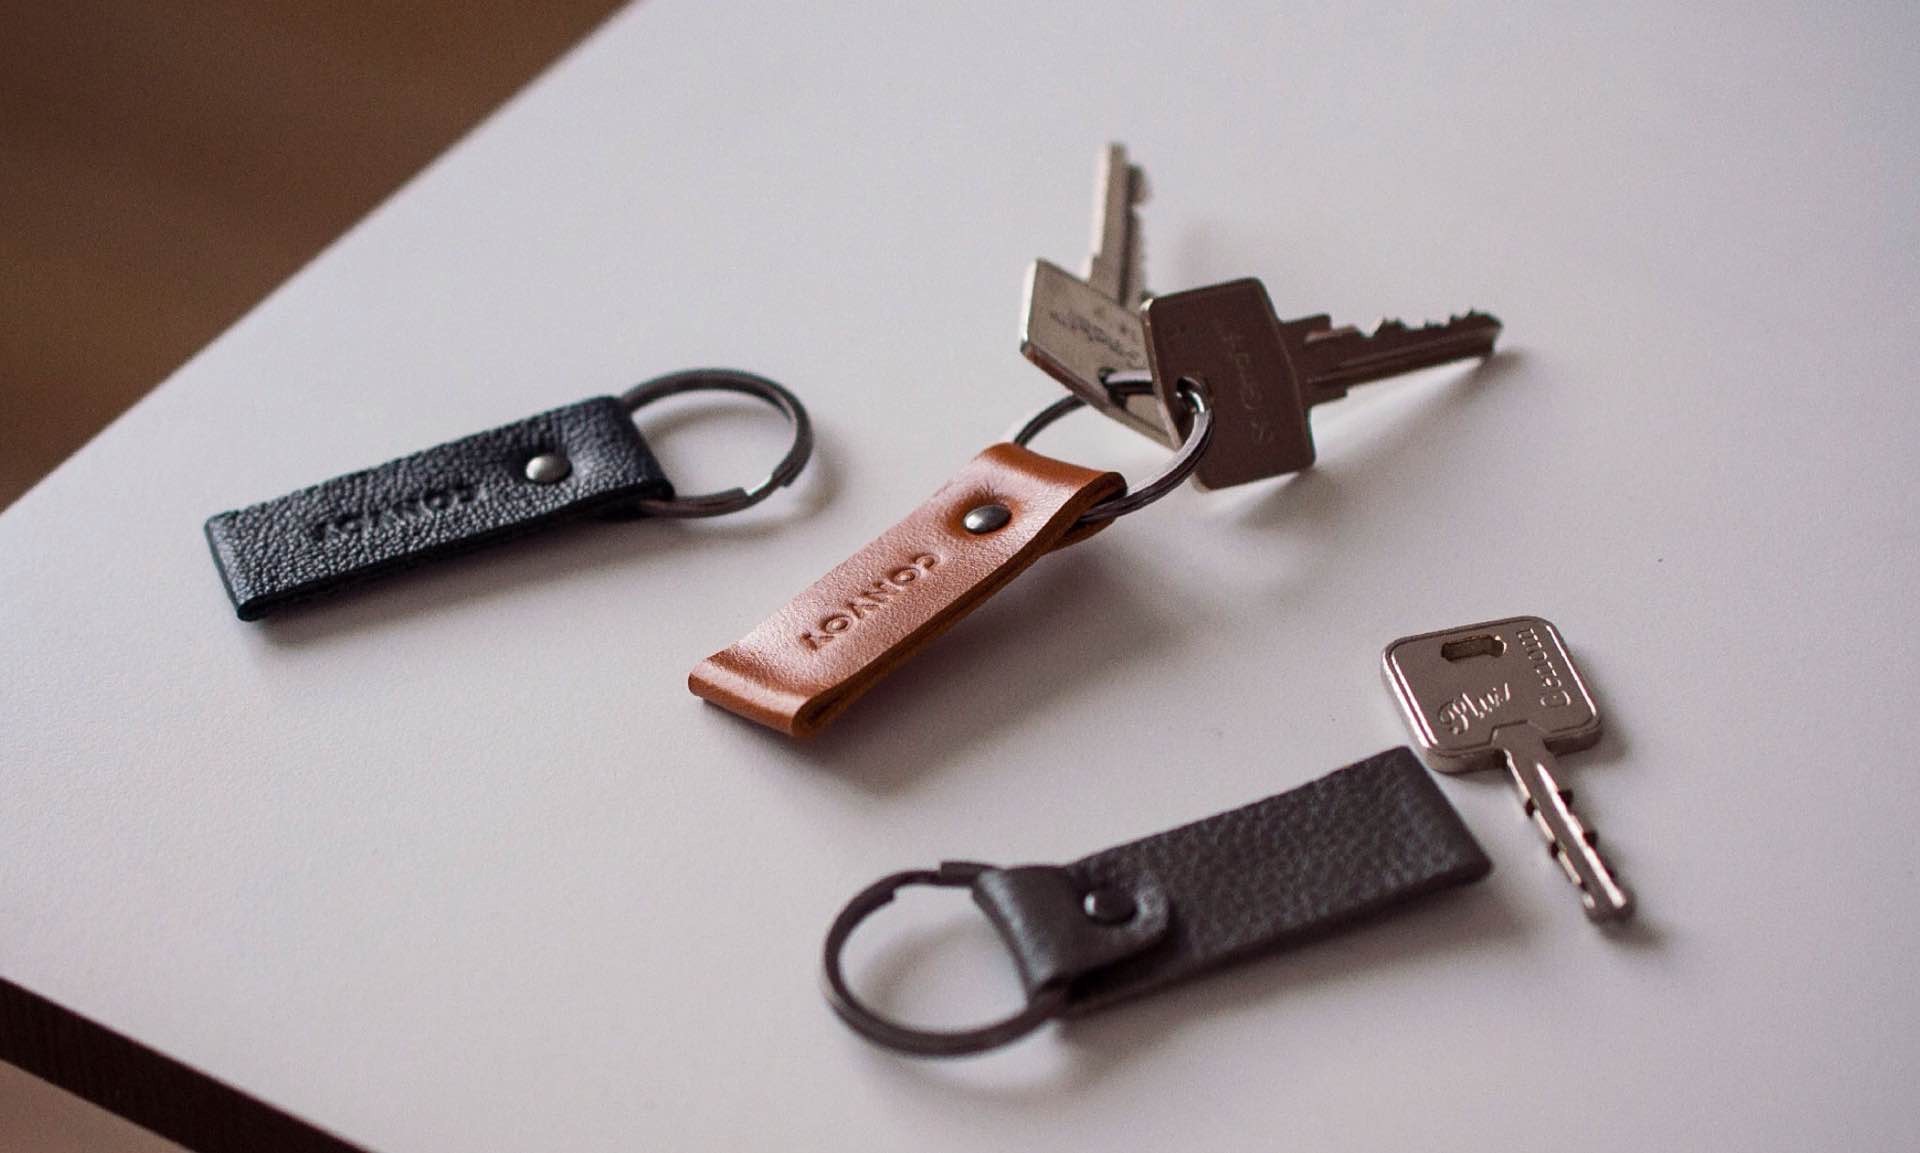 Convoy Co. leather key fob. ($8)